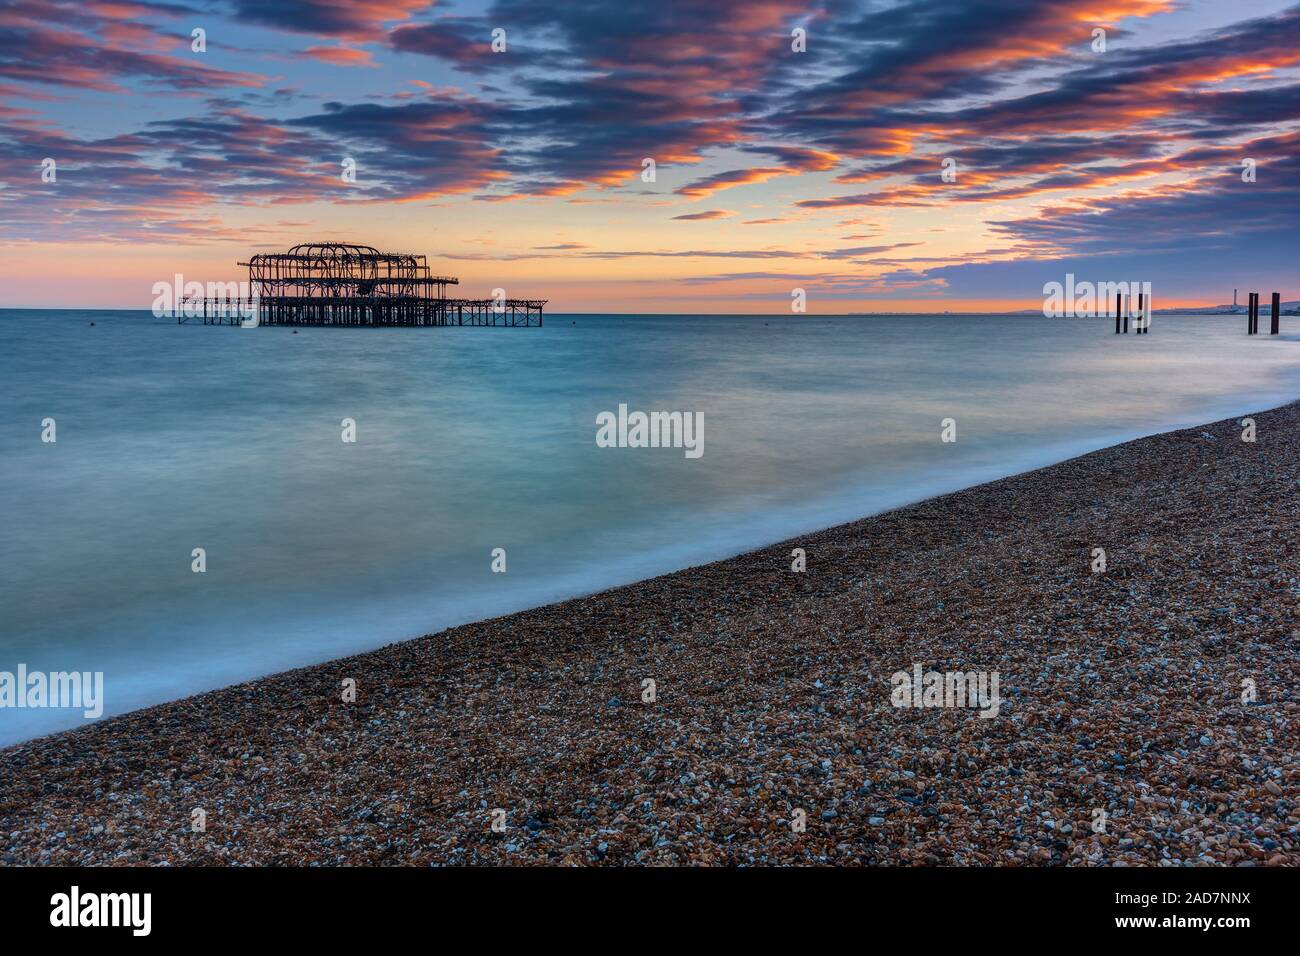 The old destroyed West Pier in Brighton, UK, after sunset Stock Photo